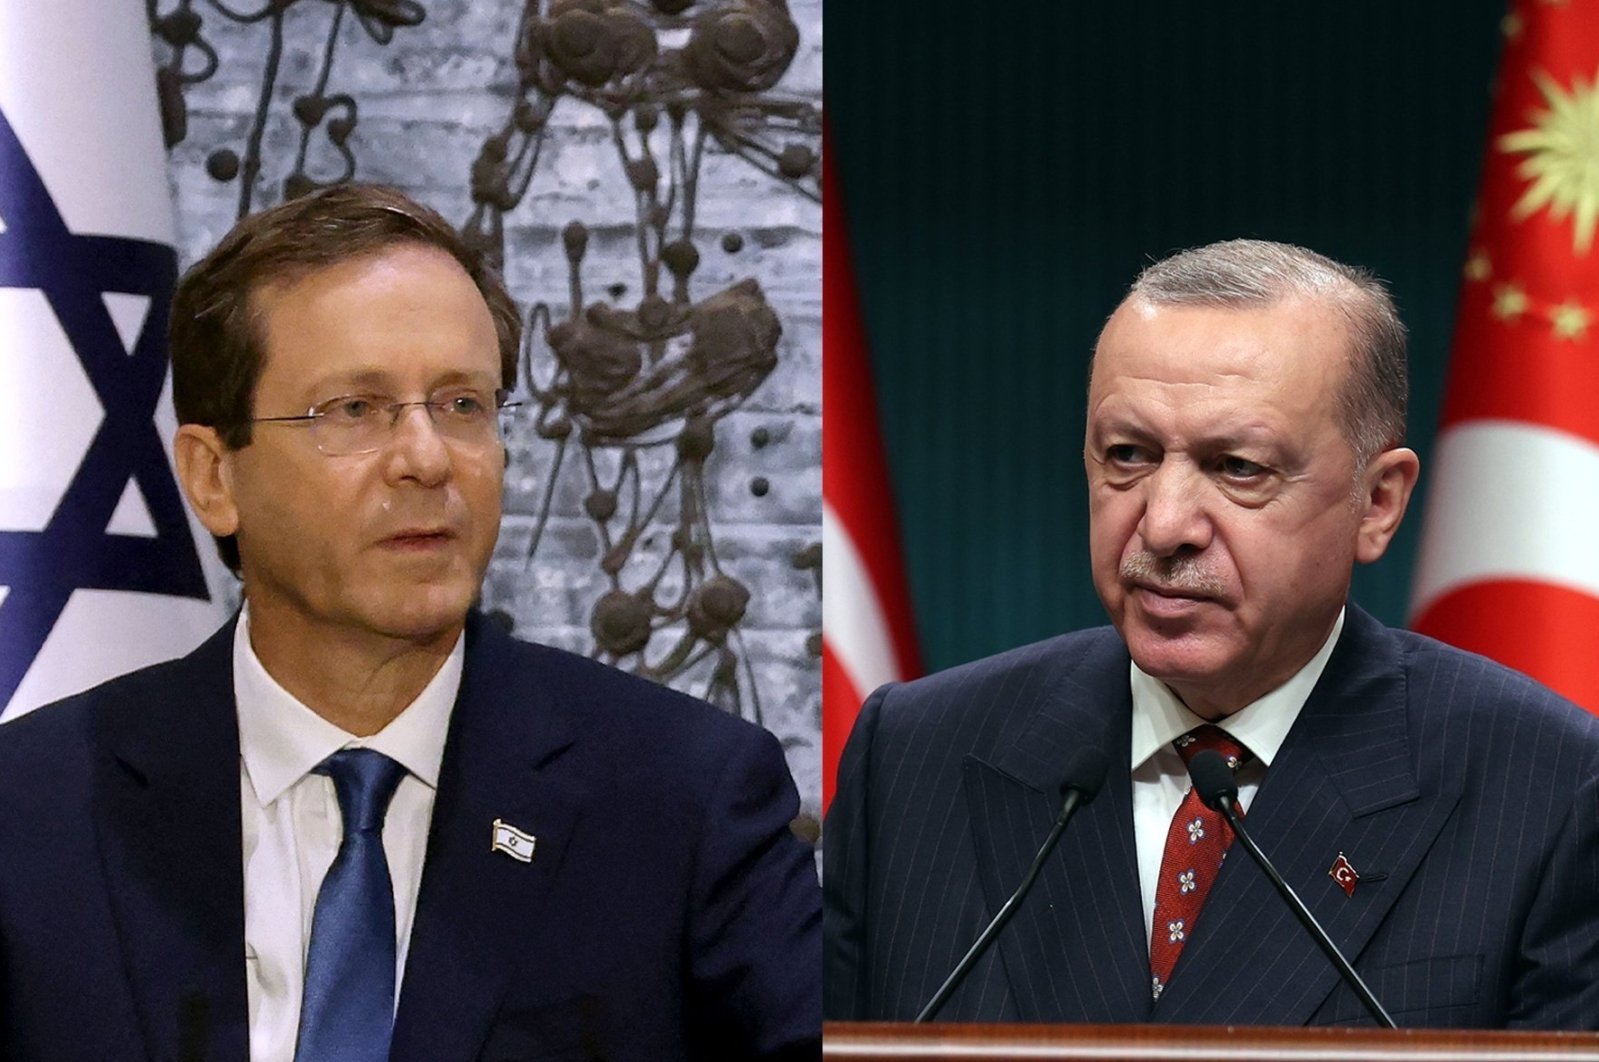 In this photo combination, Israeli President Isaac Herzog (L) looks on during a press conference at the President&#039;s residence in West Jerusalem, Israel, July 7, 2021 and President Recep Tayyip Erdoğan prepares to address a press conference at Ankara&#039;s Presidential Complex, Turkey, July 12, 2021. (Photos by AFP &amp; AA)